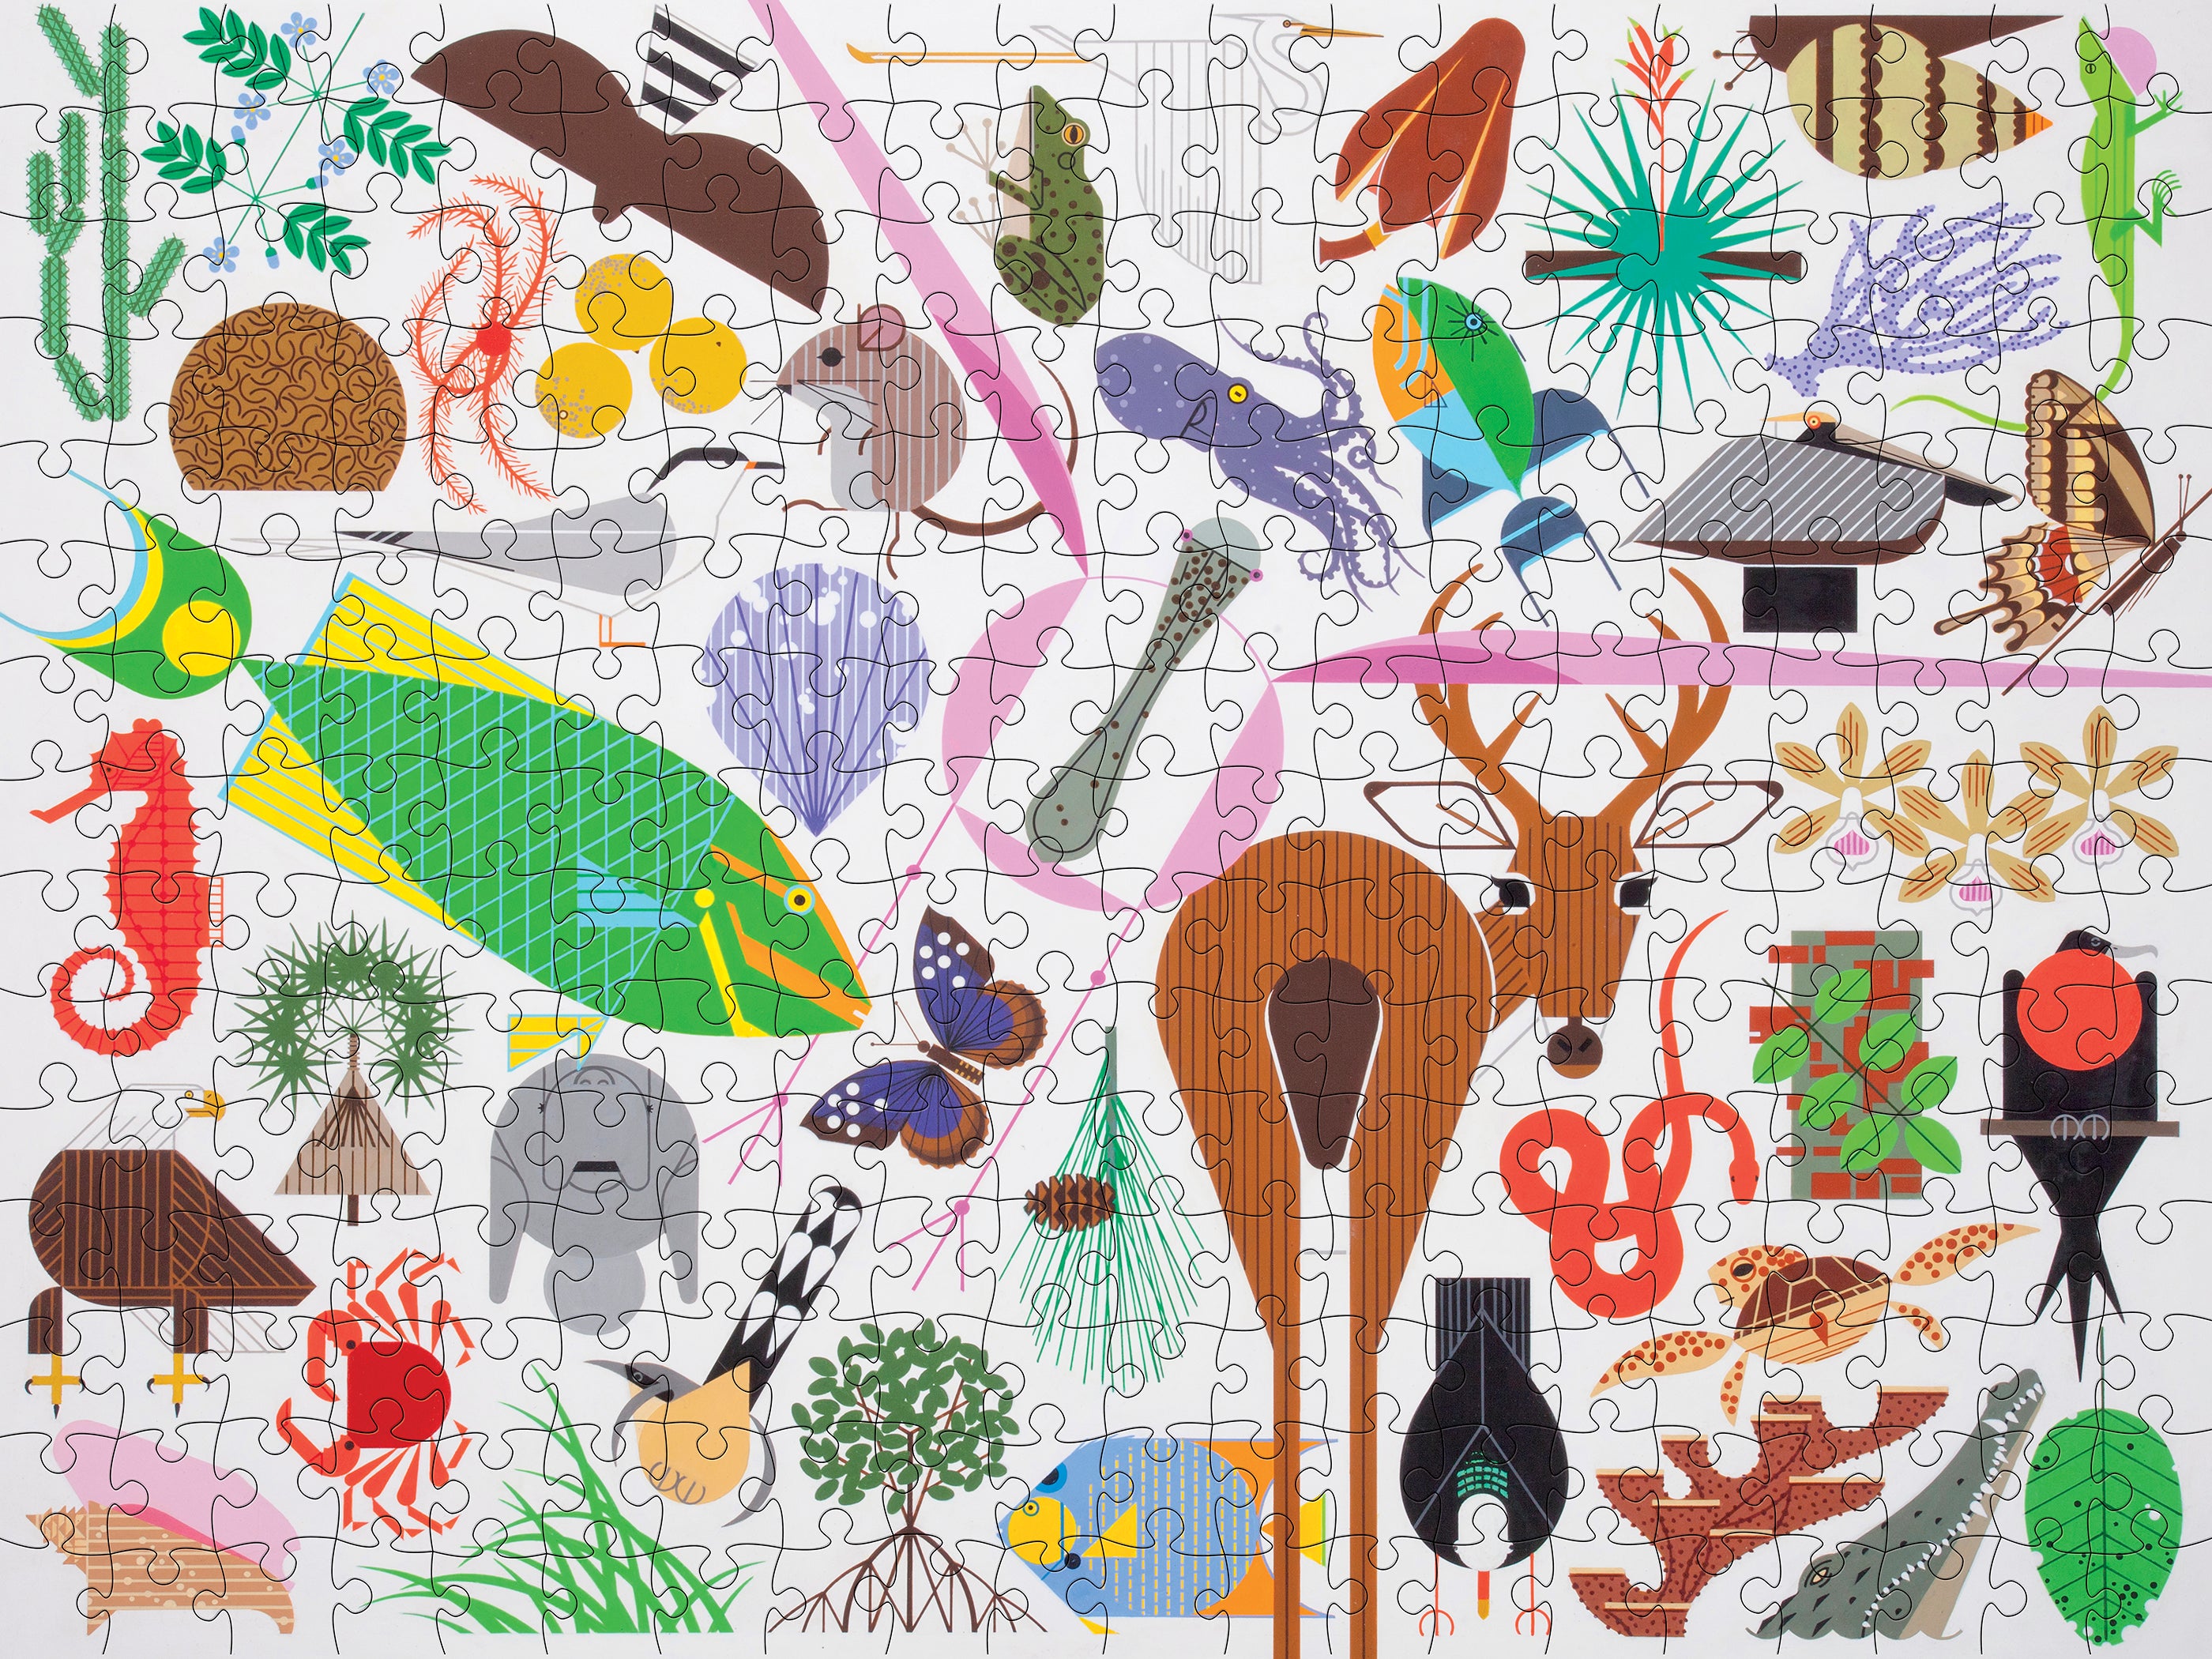 Charley Harper- Wildlife Wonders 500-Piece Jigsaw Puzzle finished size is 24 by 18 inches.